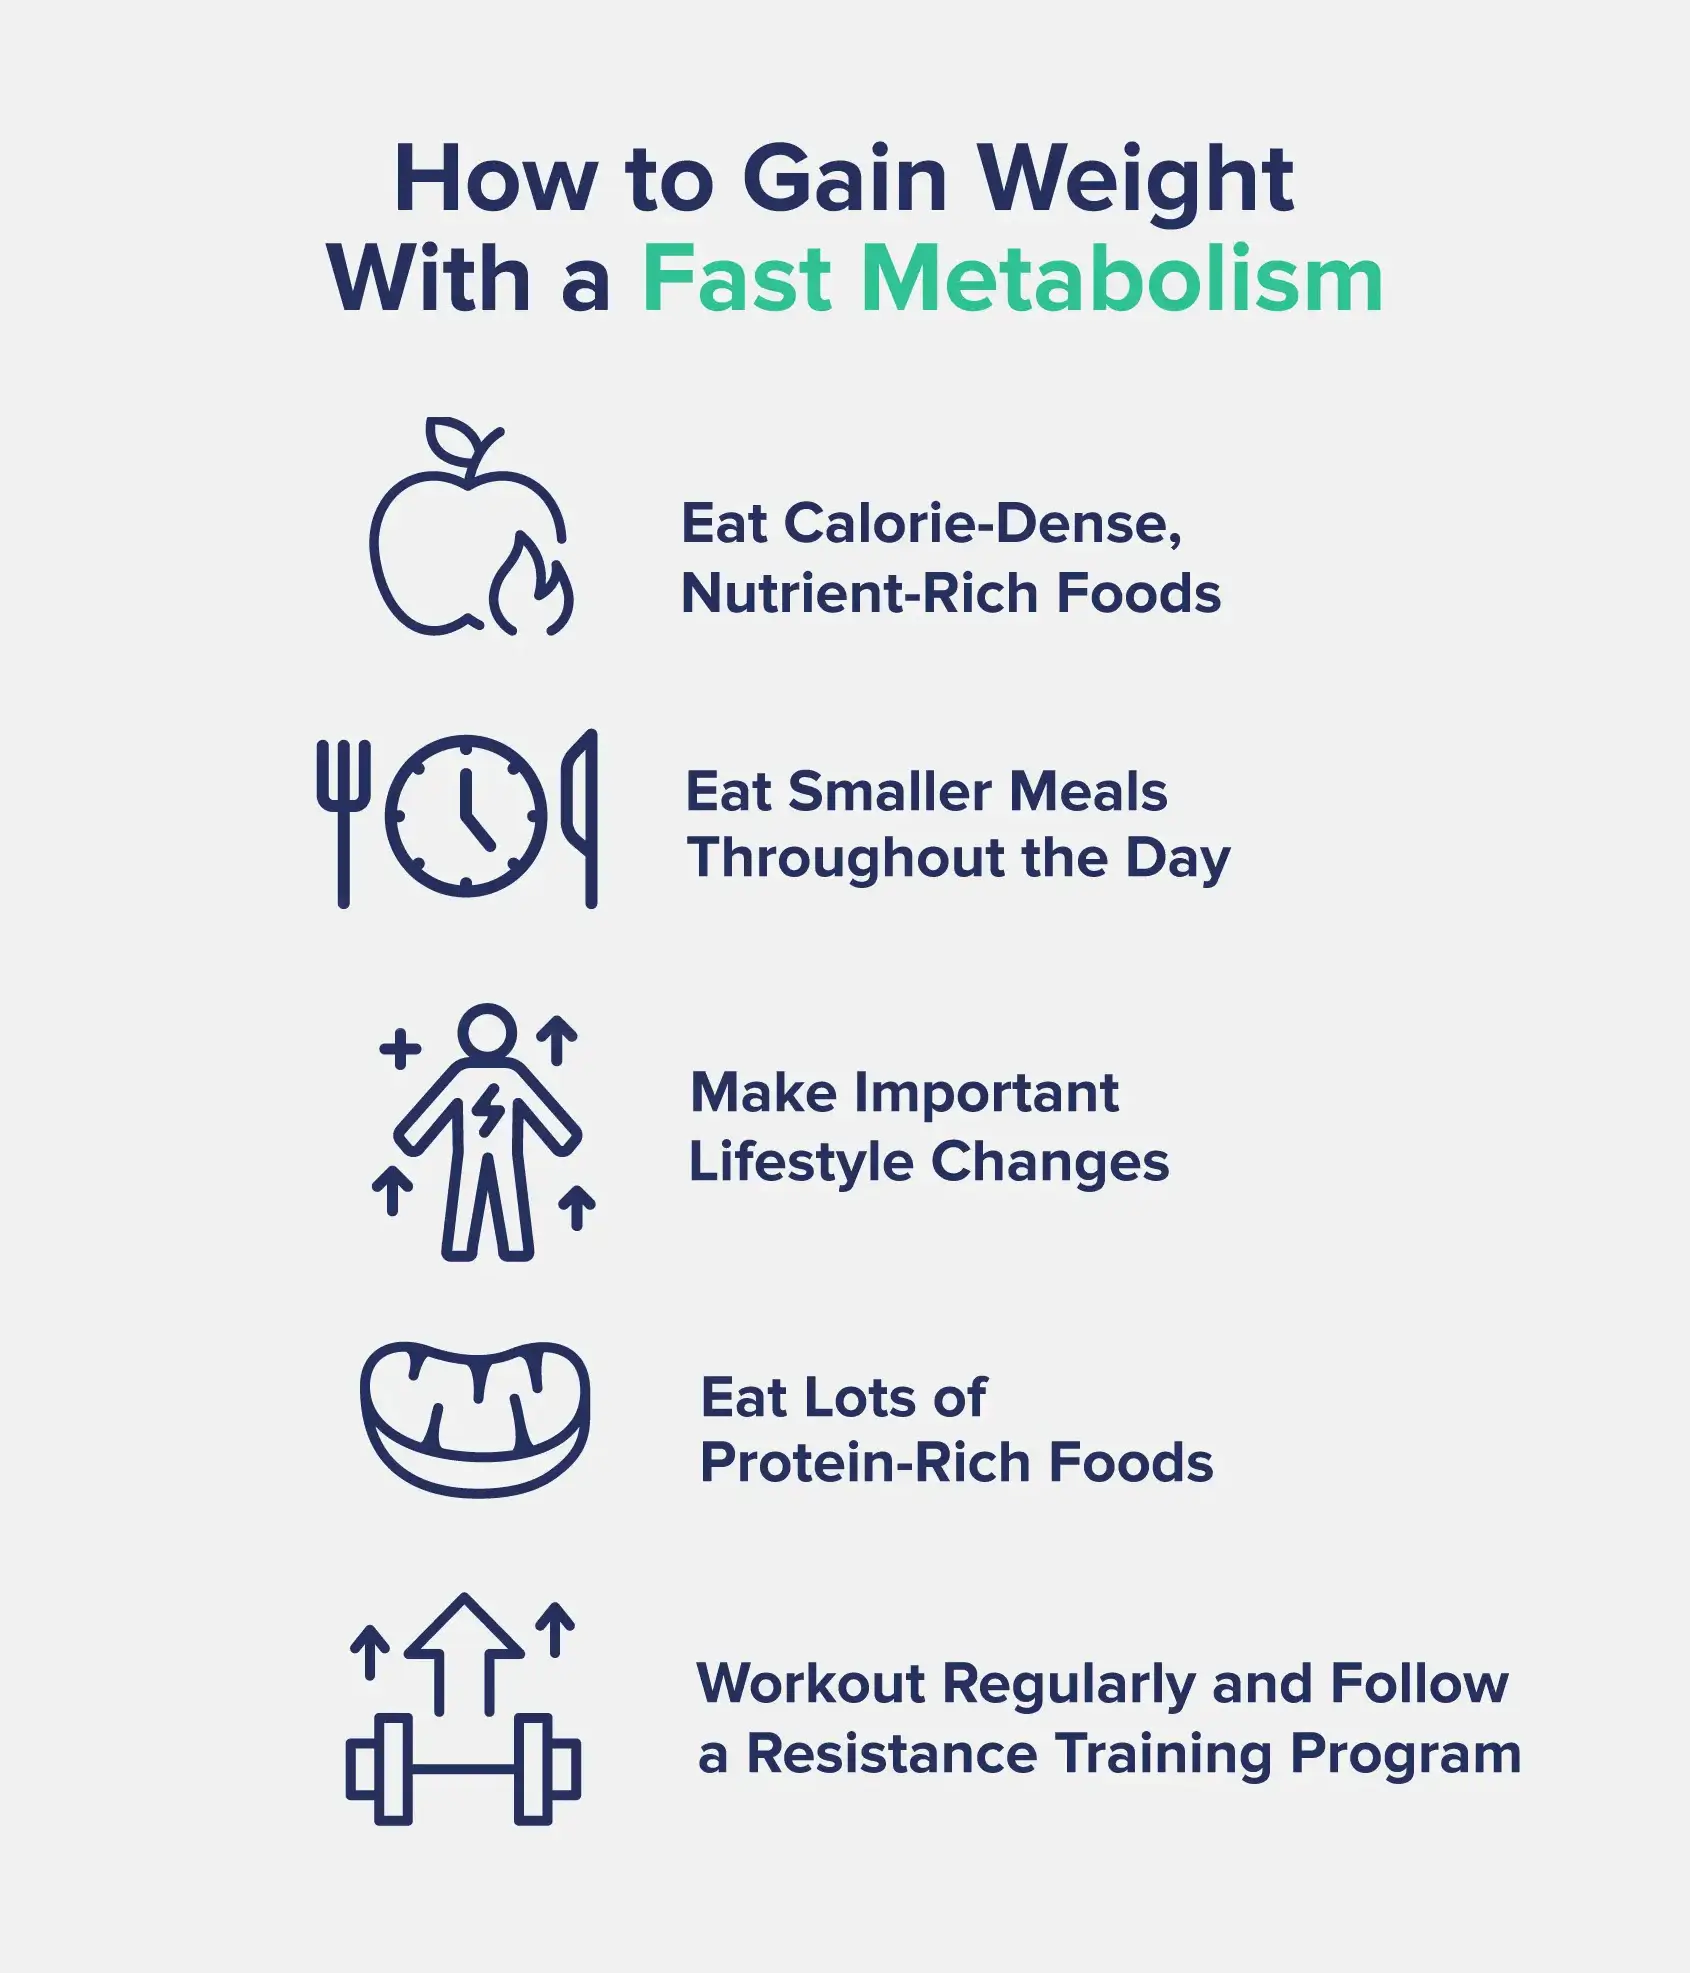 A graphic entitled "How to Gain Weight With a Fast Metabolism" with icons corresponding to statements like "eat calorie-dense foods" and "eat smaller meals throughout the day"